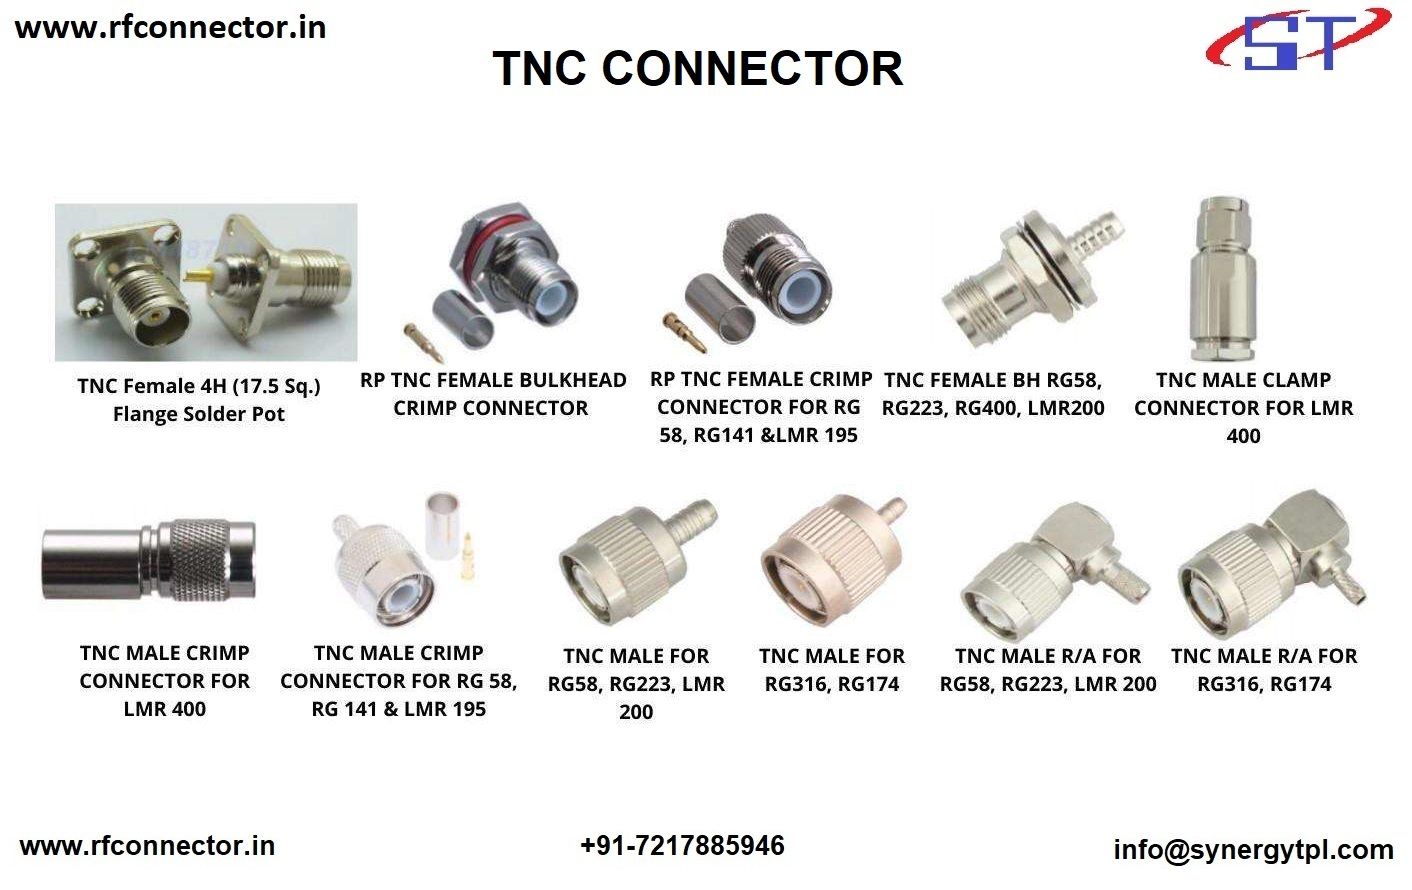 TNC male clamp connector for LMR 200 cable